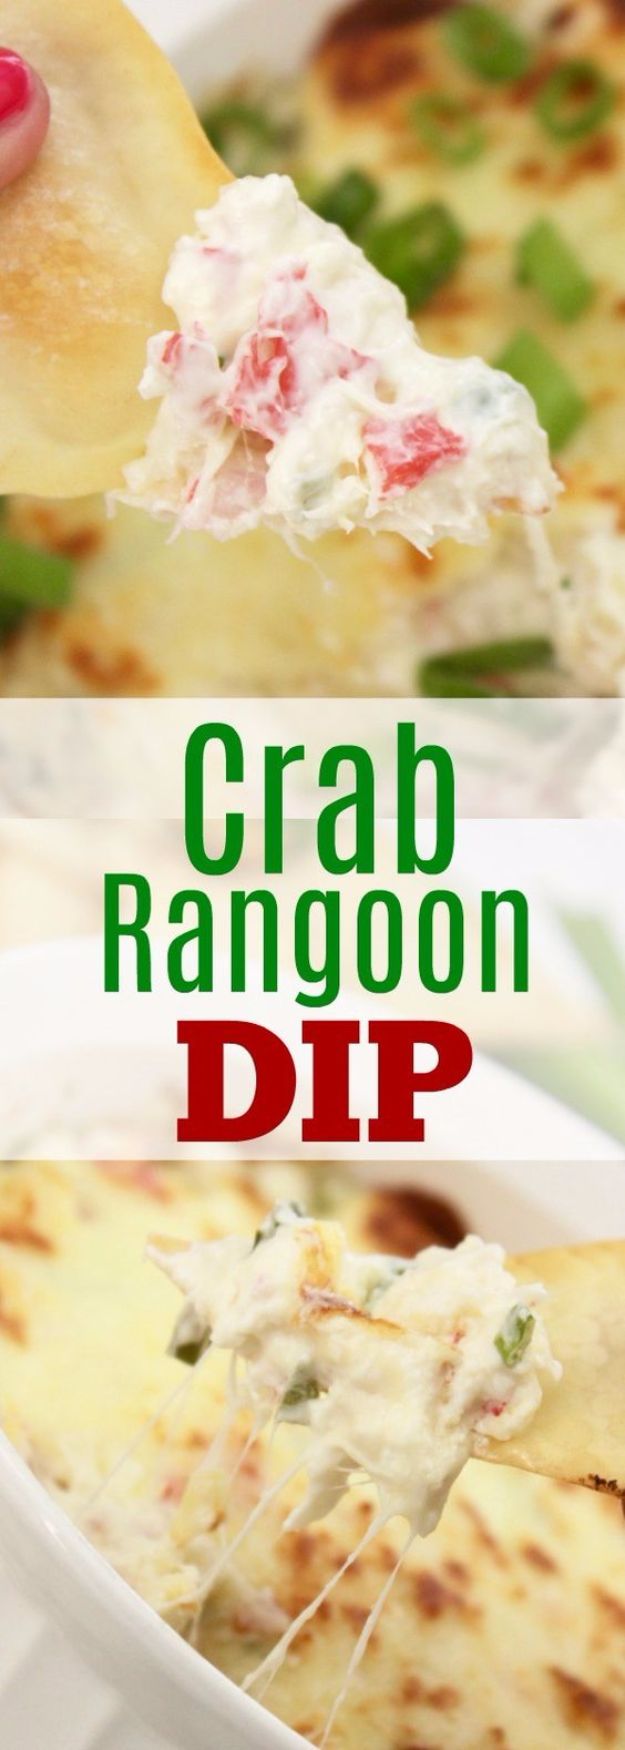 Best Dip Recipes - Baked Crab Rangoon Dip - Easy Recipe Ideas for A Party Appetizer - Cold Recipe Ideas for Chips, Crockpot, Mexican Bean Dip, Desserts and Healthy Fruit Options - Italian Dressing and Ranch Dip Recipe Ideas 